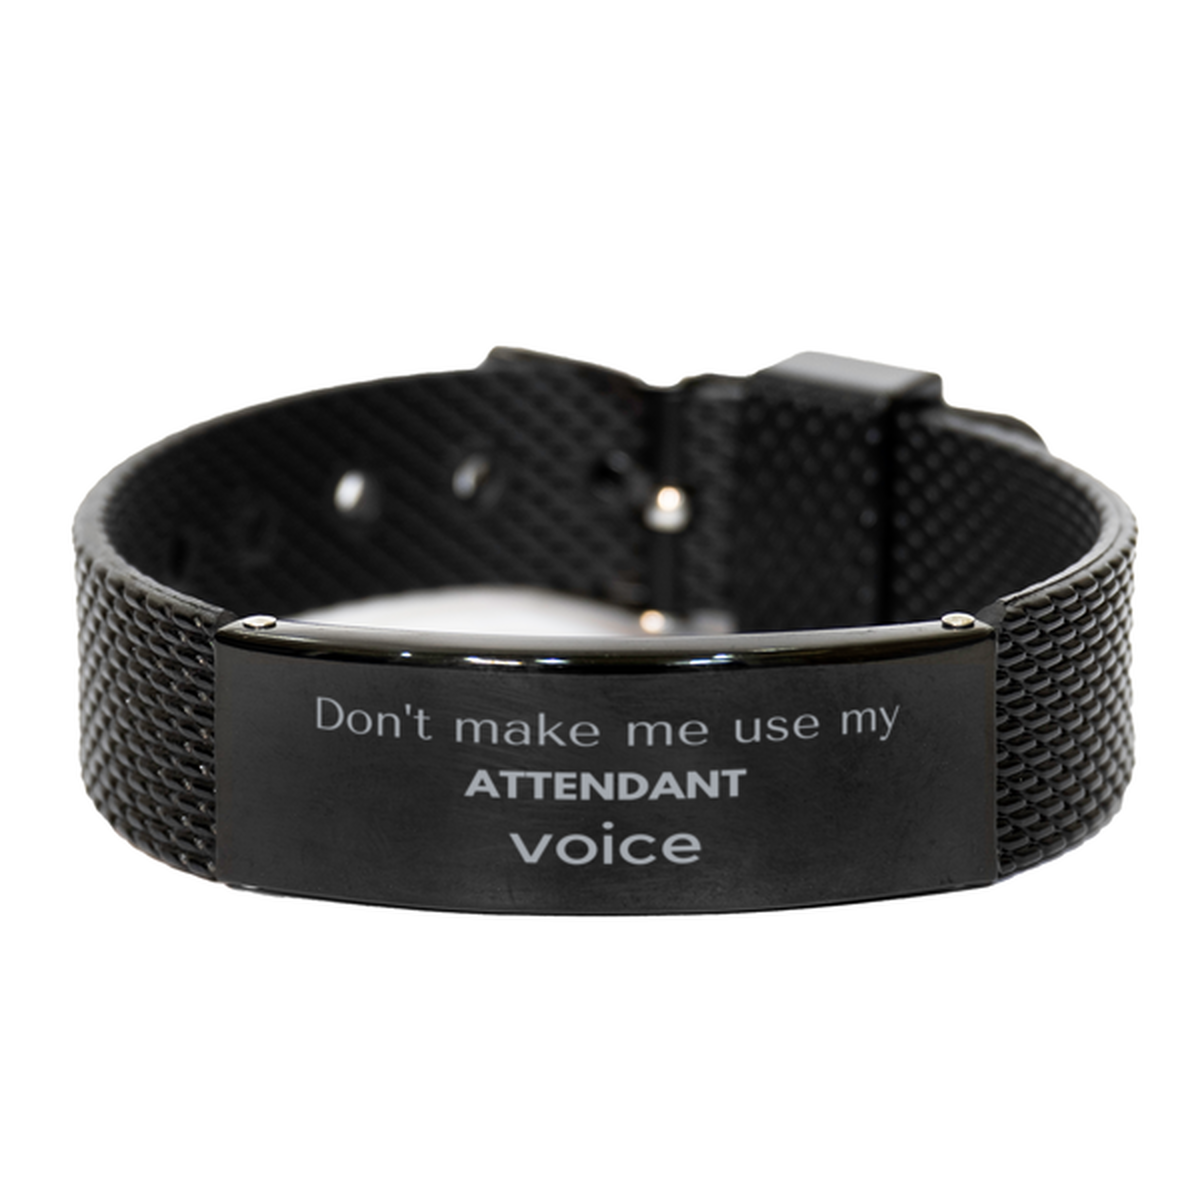 Don't make me use my Attendant voice, Sarcasm Attendant Gifts, Christmas Attendant Black Shark Mesh Bracelet Birthday Unique Gifts For Attendant Coworkers, Men, Women, Colleague, Friends